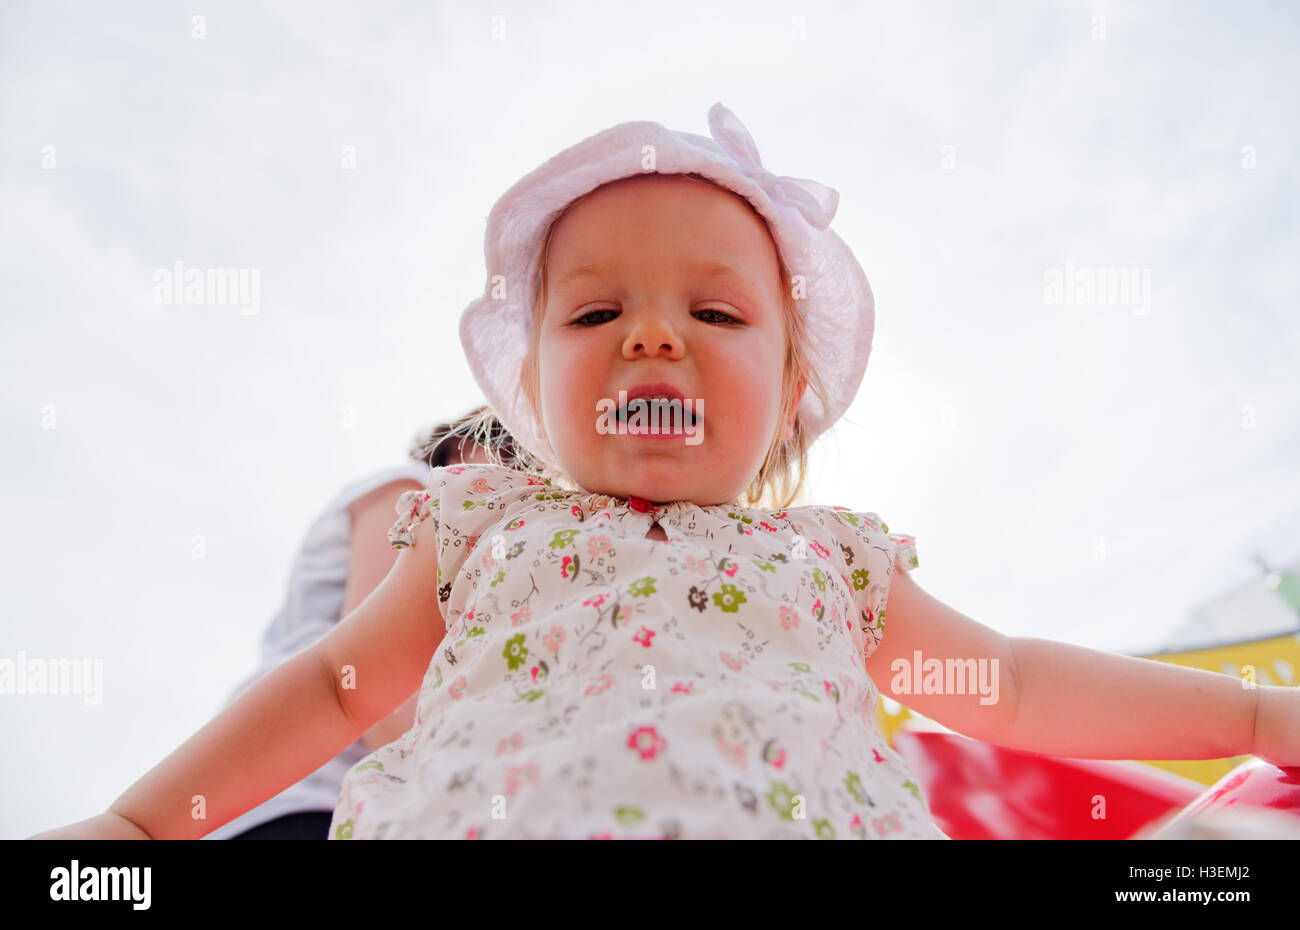 Looking up at a smiling young girl (2 yr old) dressed in white summer clothes Stock Photo